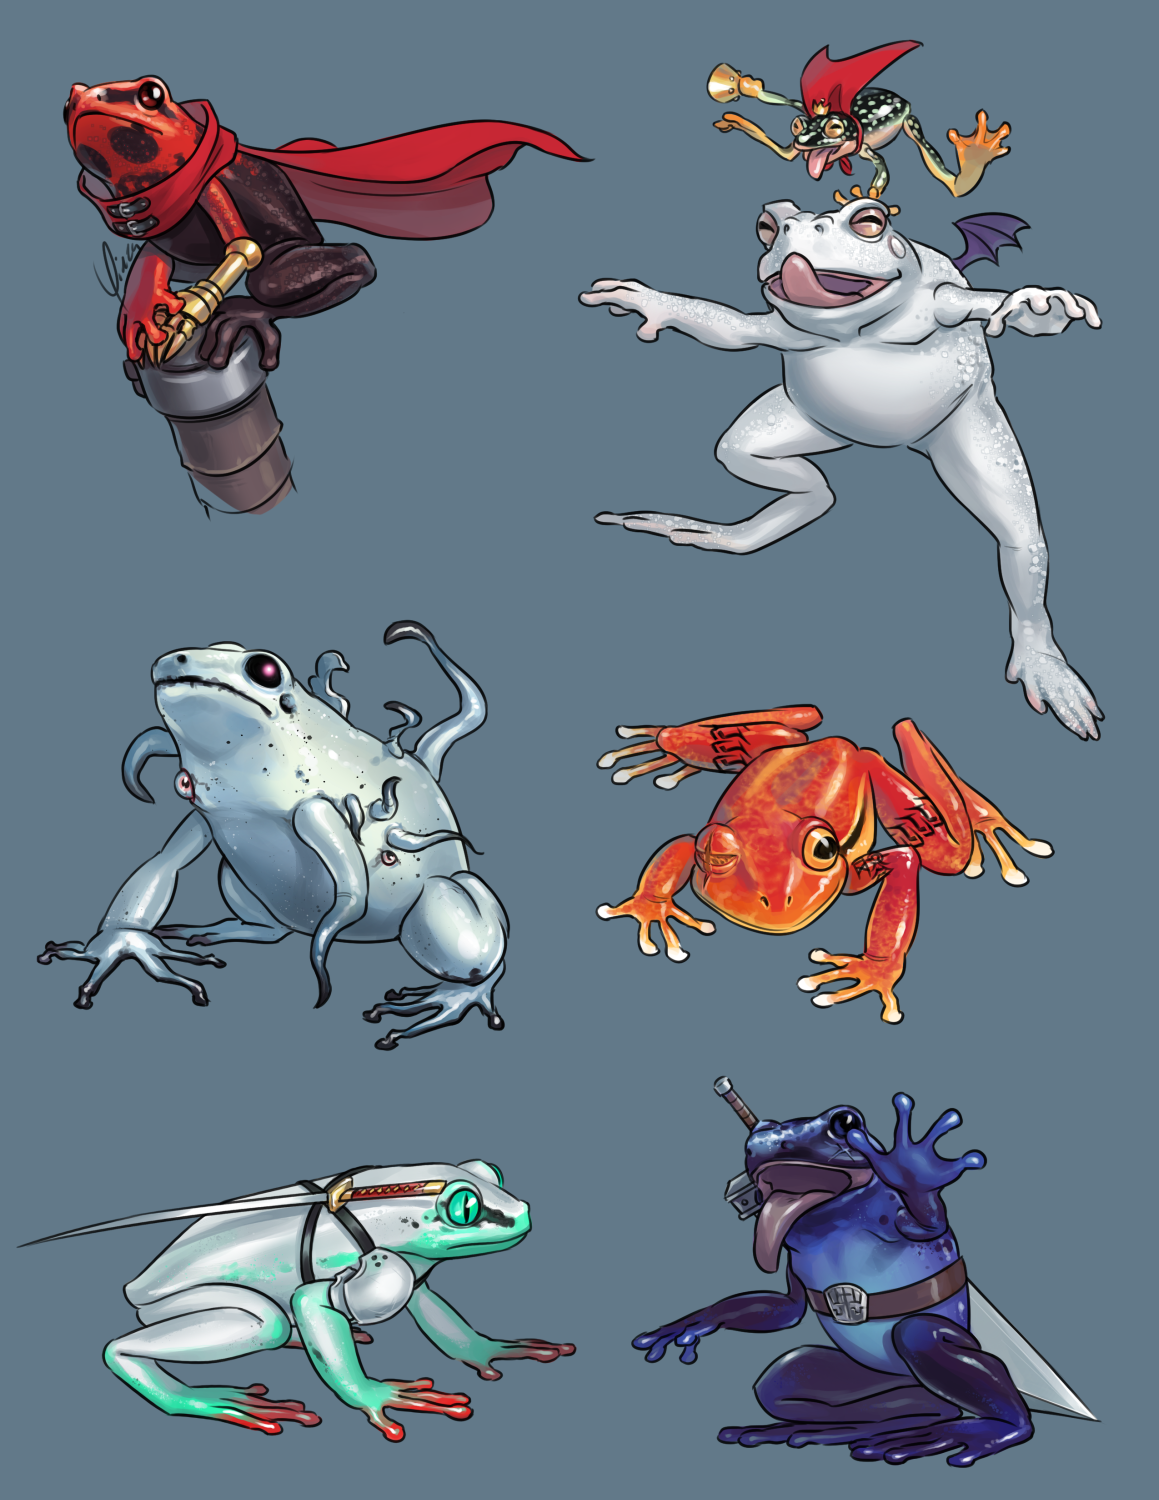 Digital artwork for 6 different frog designs of Final Fantasy VII characters. Vincent is based on a red-headed poison dart frog. His left forearm is still his metal claw and he wears a simplified version of his red cape. He sits perched on the pommel of the Buster Sword. Cait Sith is based on a starry night reed frog, with a white-spotted black back and gold underside. He wears his cape and crown and carries his megaphone. Mog is a large white toad and retains his moogle wings. Both of them are jumping upwards and grinning with their tongues out. Jenova is based on a mint golden poison frog, a pale blue-green color with black at her extremities. She has a tentacle in place of her left arm, and more tentacles of varying sizes growing from her back, as well as two additional eyes. There is a pink glow in her main black eye. Nanaki has the orange coloring of a tomato frog, but a body shape more like a tree frog. He is still missing his right eye, and retains his tattoos. He is crouched low on all fours. Sephiroth is loosely based on a painted reed frog. His body is silver, with bright green on his face and legs which fades into a bright red at the toes. He wears his pauldrons and mini Masamune strapped to his back with criss-cross straps. His eyes are still green with vertical slits. Zack is based on a blue poison dart frog. He retains his criss-cross scar and wears the Buster Sword on his back held on with a belt bearing the SOLDIER logo. He is sitting up on his hind legs and waving his left hand, his mouth open and tongue out in a grin.